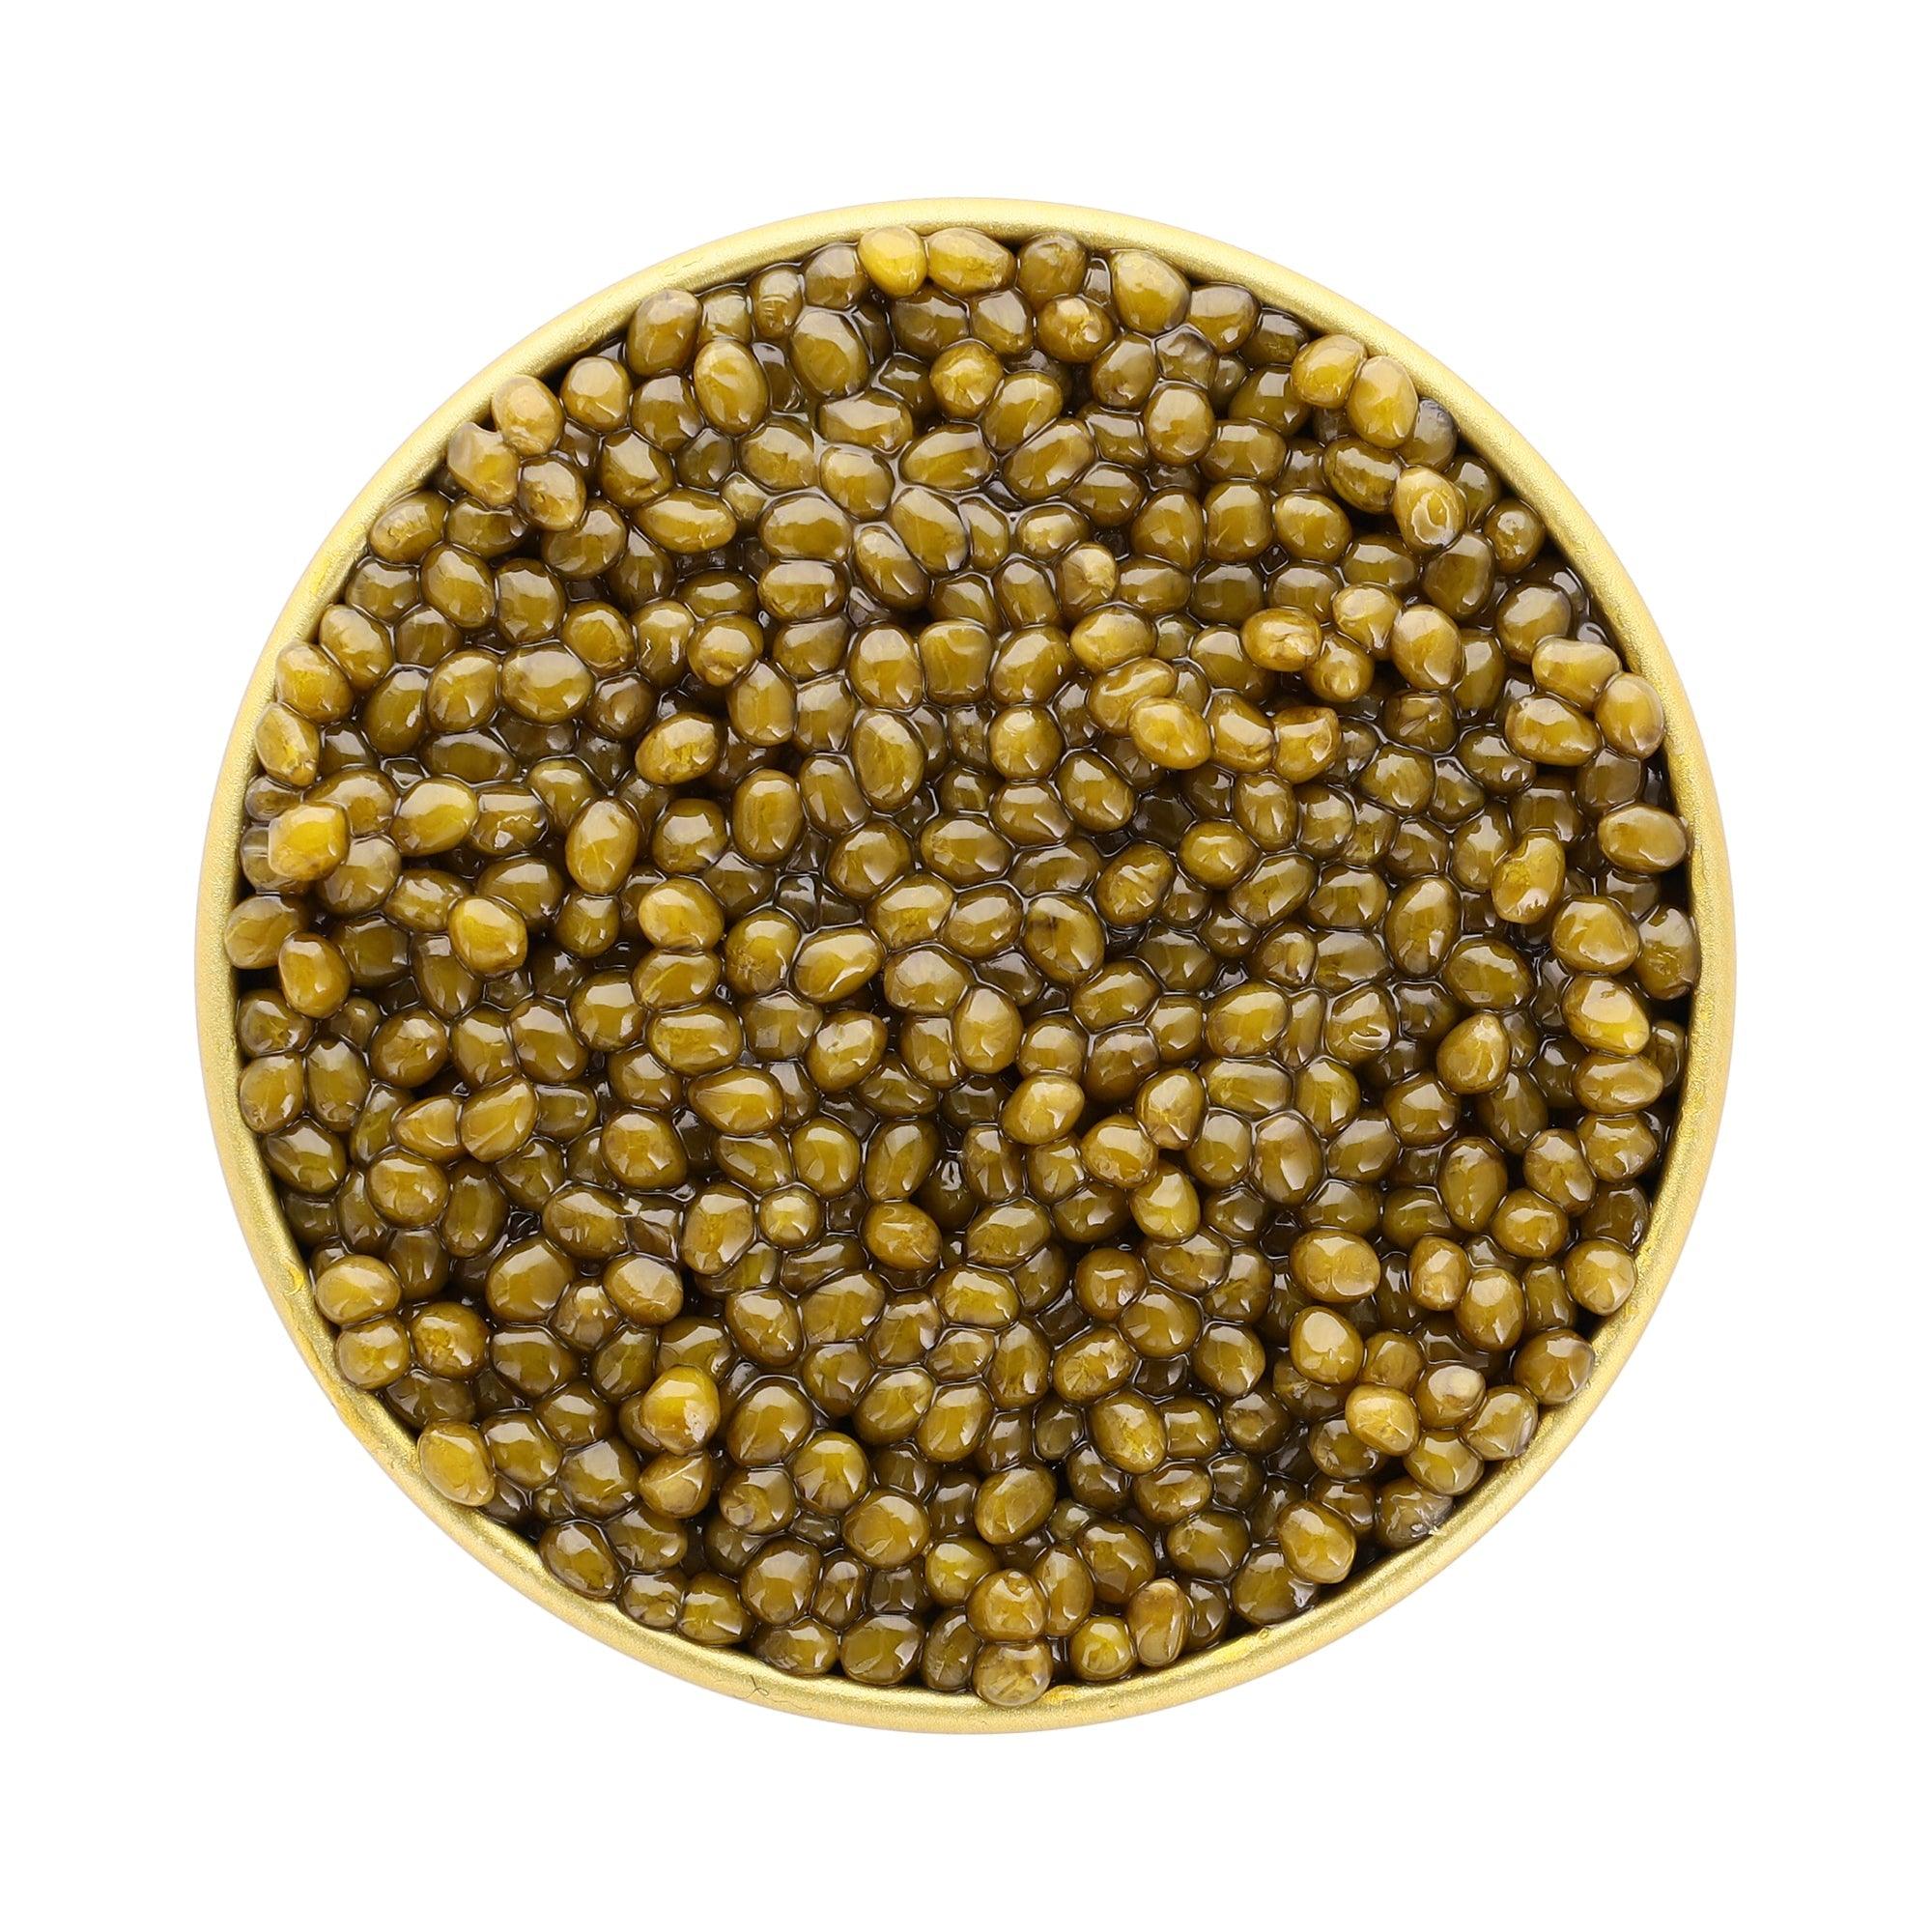 exclusive selection, large gold caviar, clean taste with bold flavors